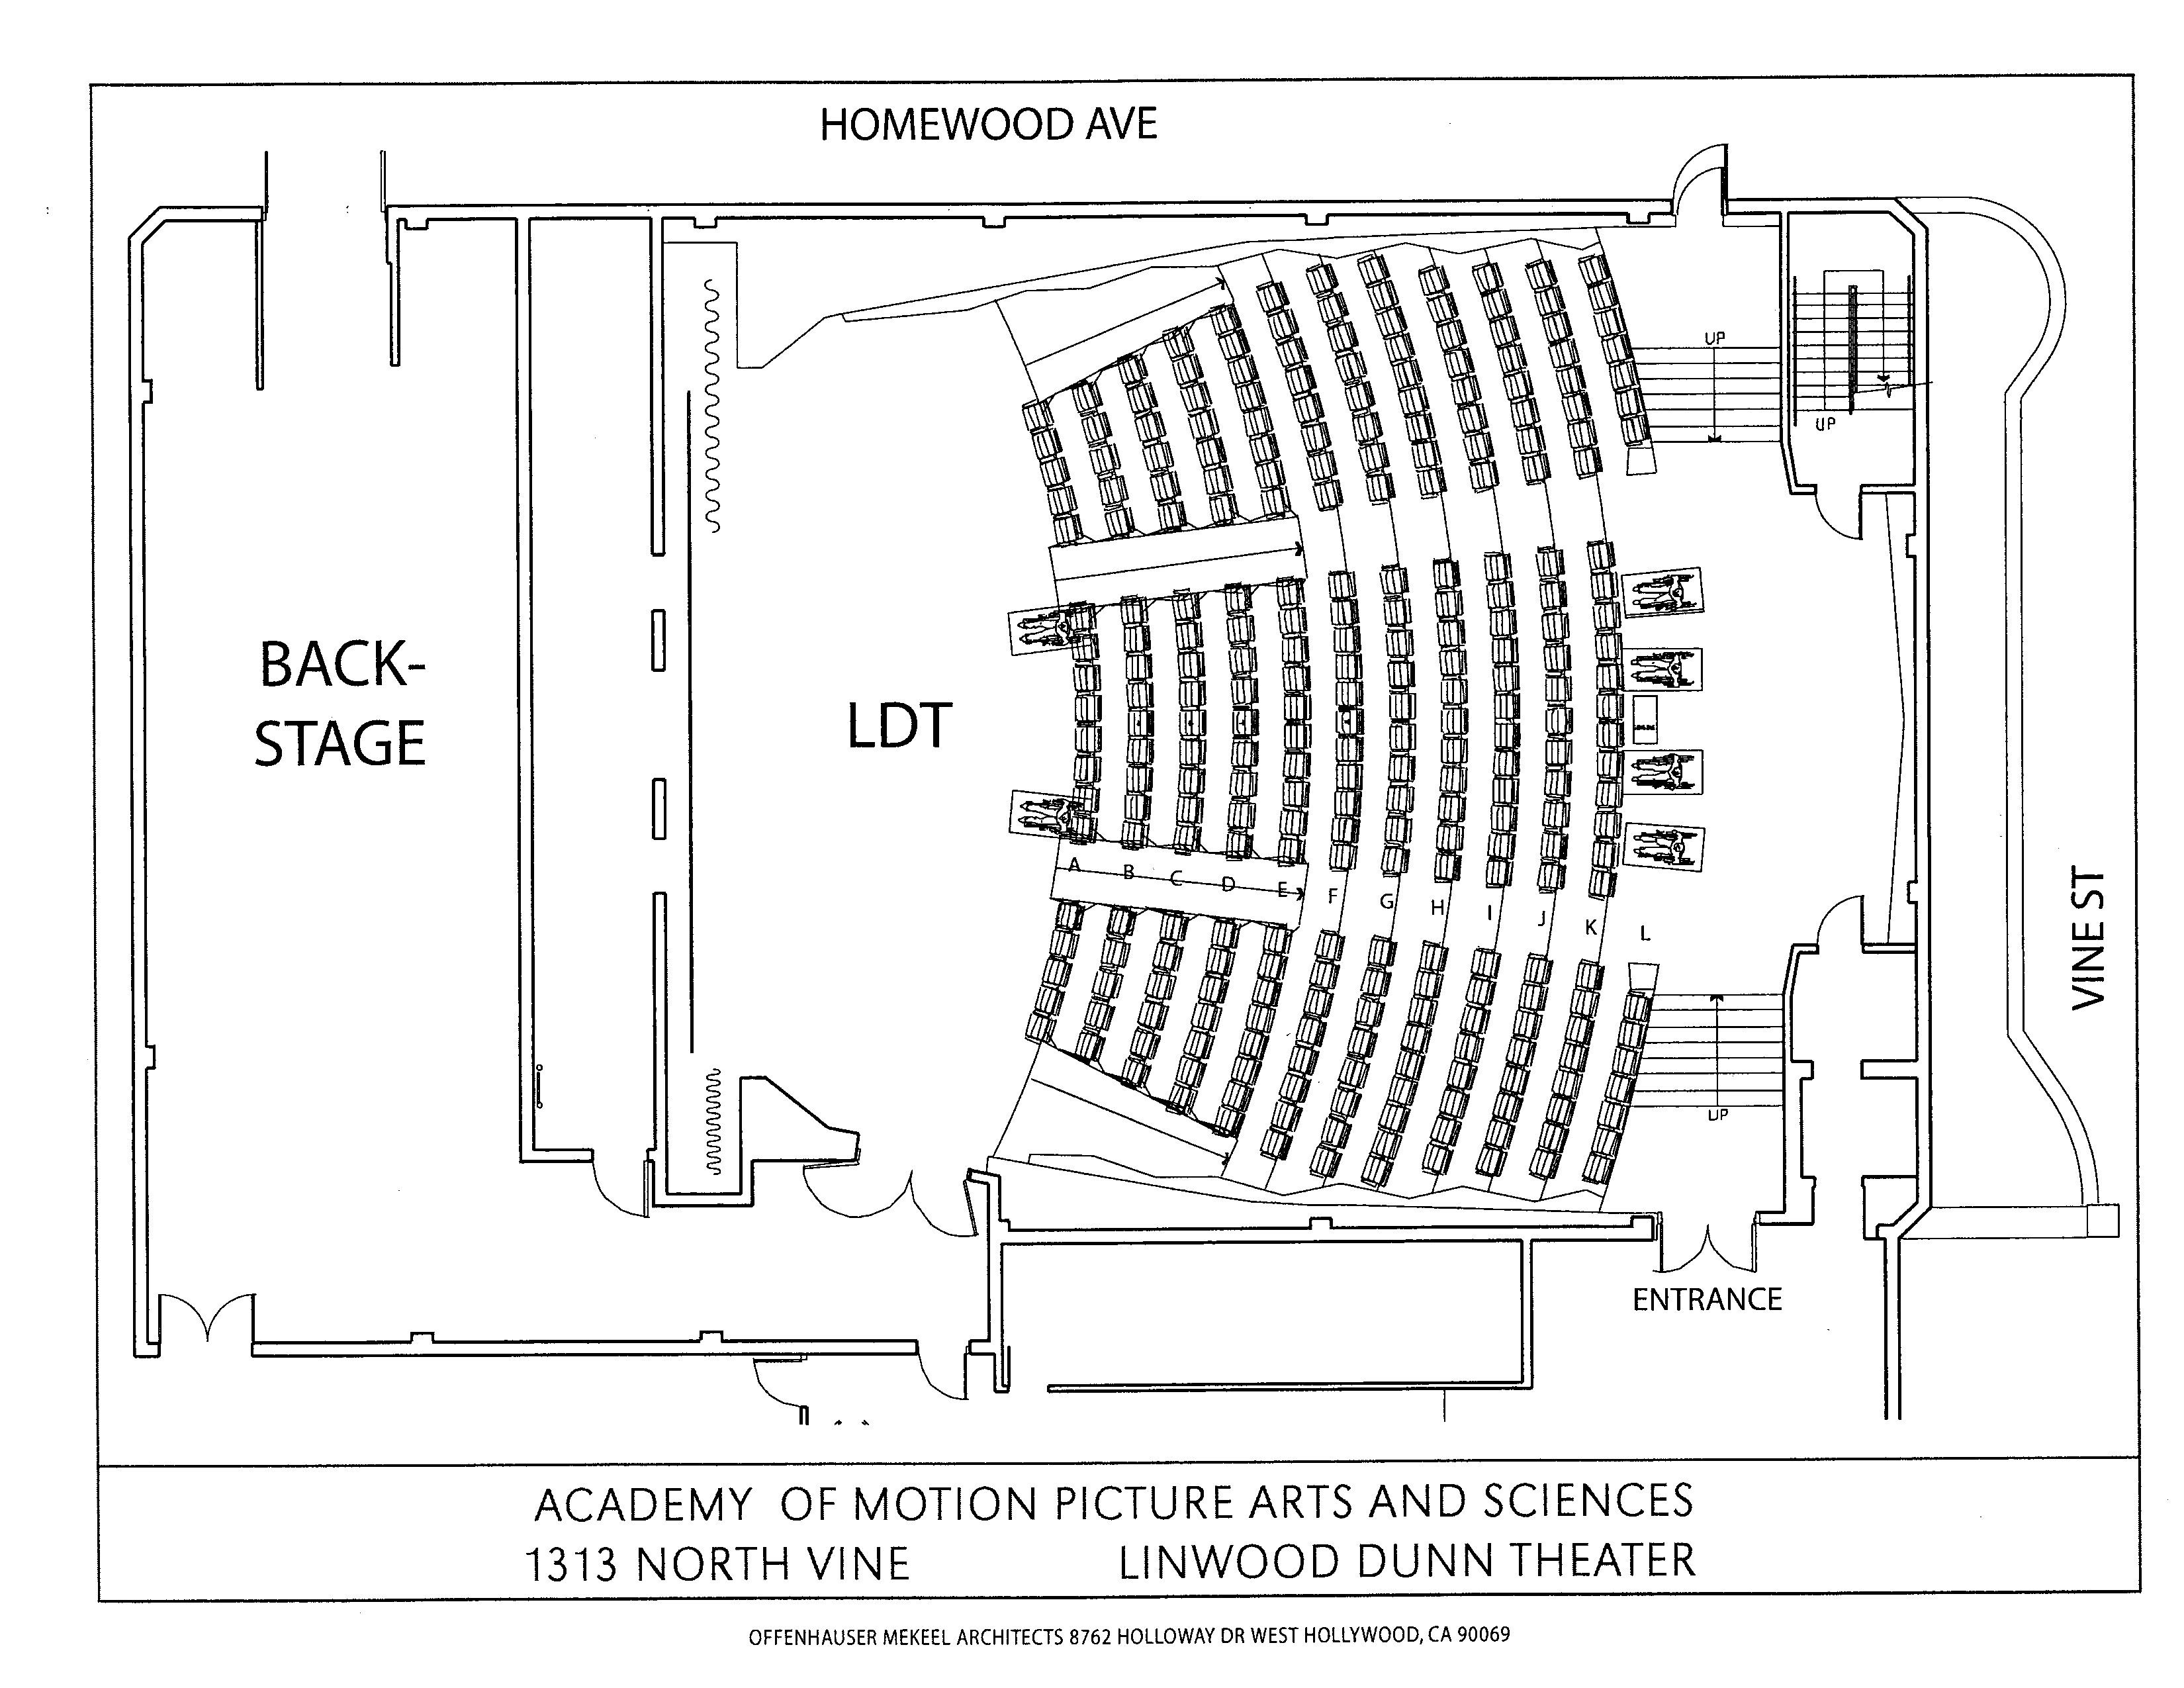 LINWOOD DUNN THEATER Academy of Motion